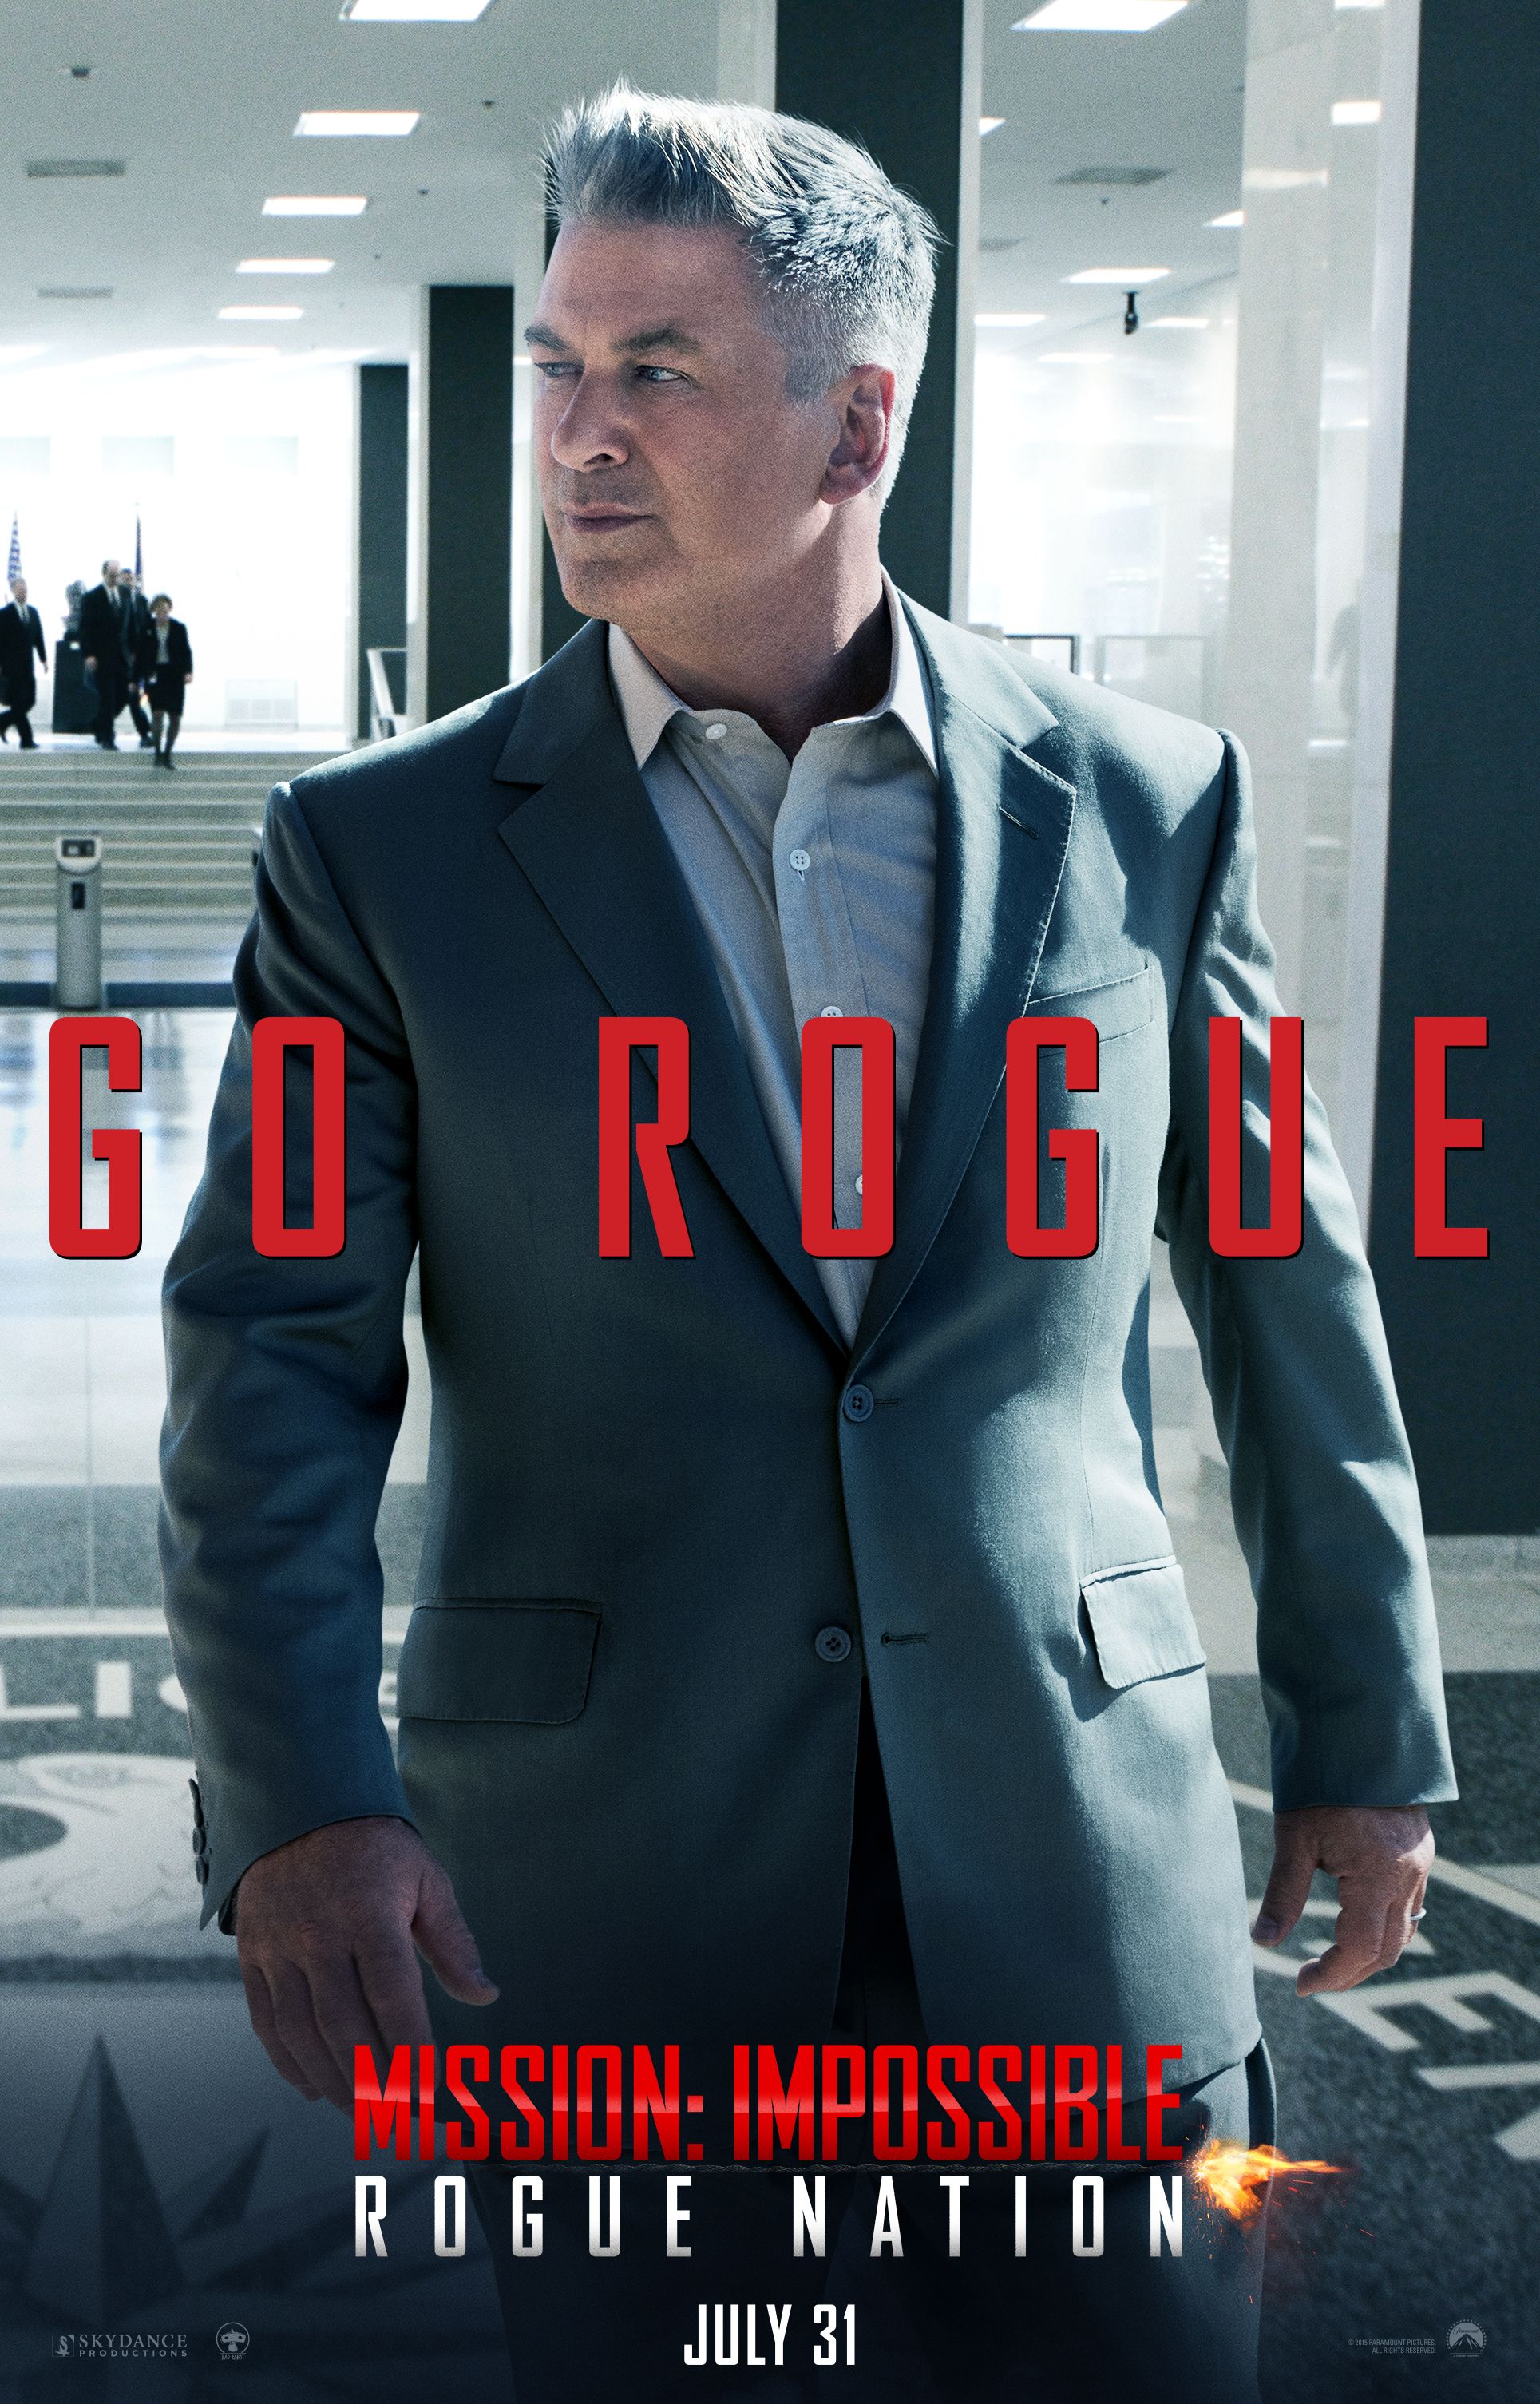 Mission: Impossible Rogue Nation Alec Baldwin Poster